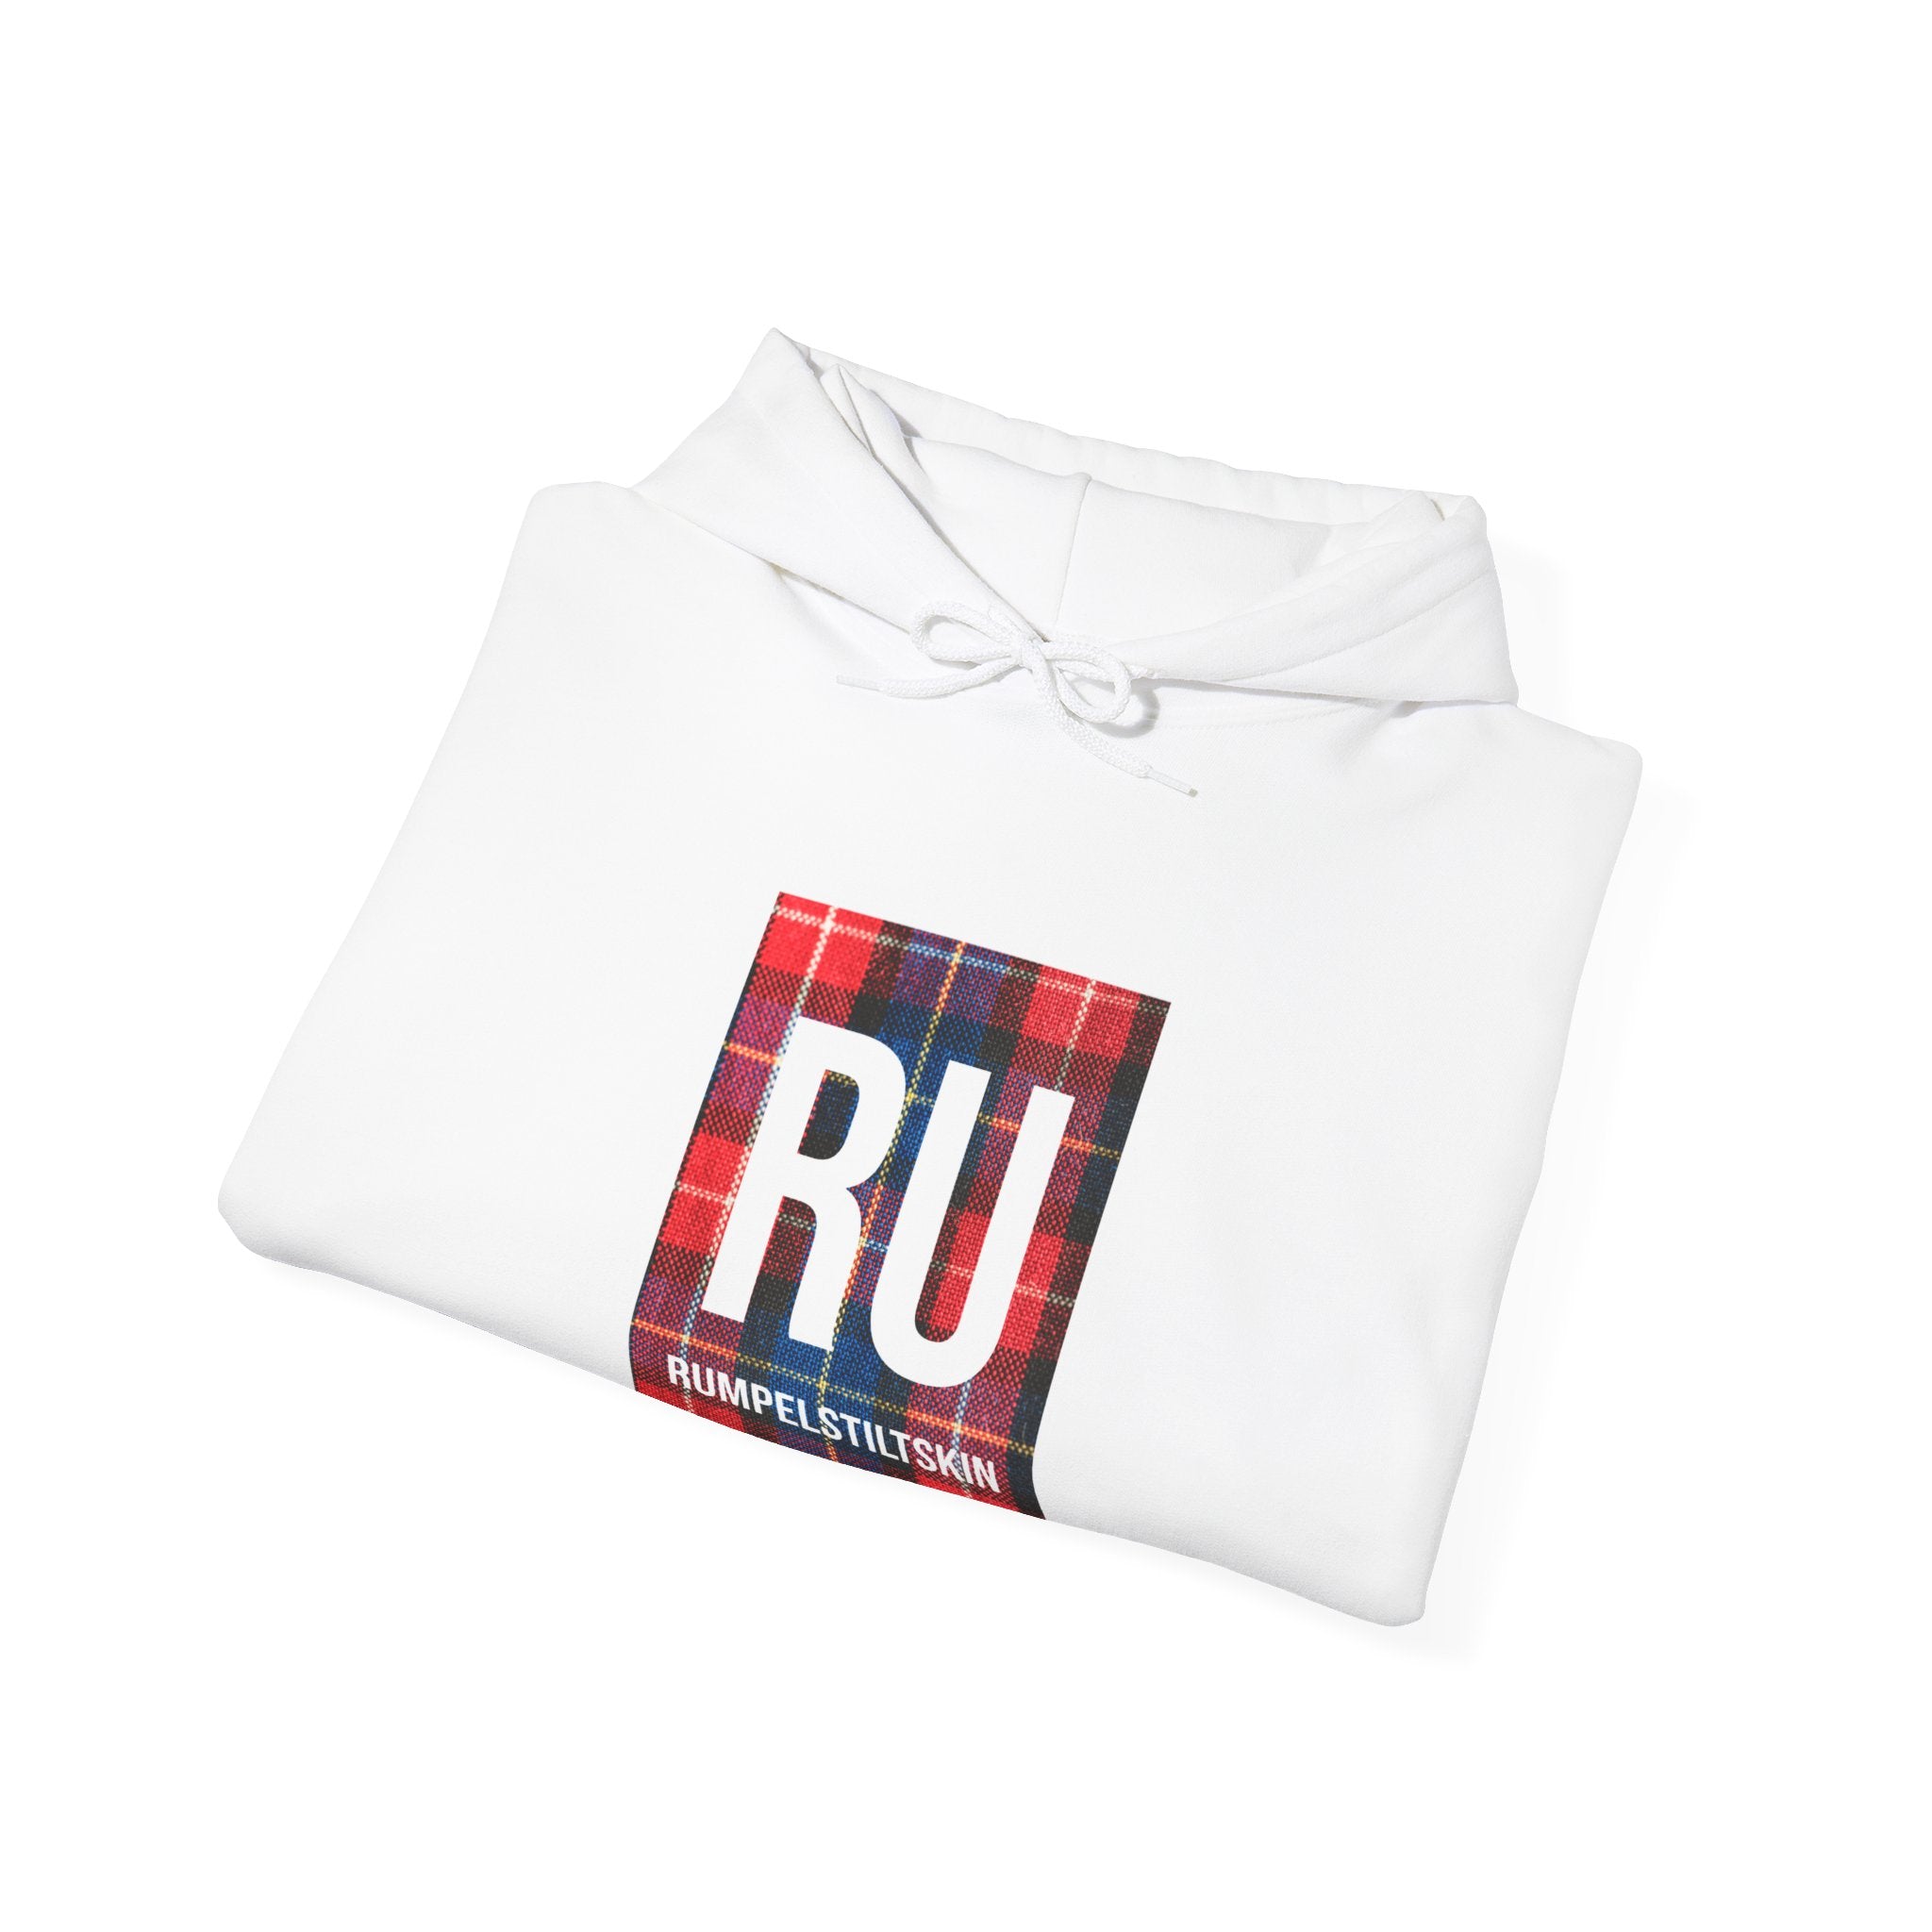 A folded white RU - Hooded Sweatshirt with "RU" and "Rumpelstiltskin" printed on the front, featuring a red and black plaid design that offers the perfect blend of style and ultimate comfort.